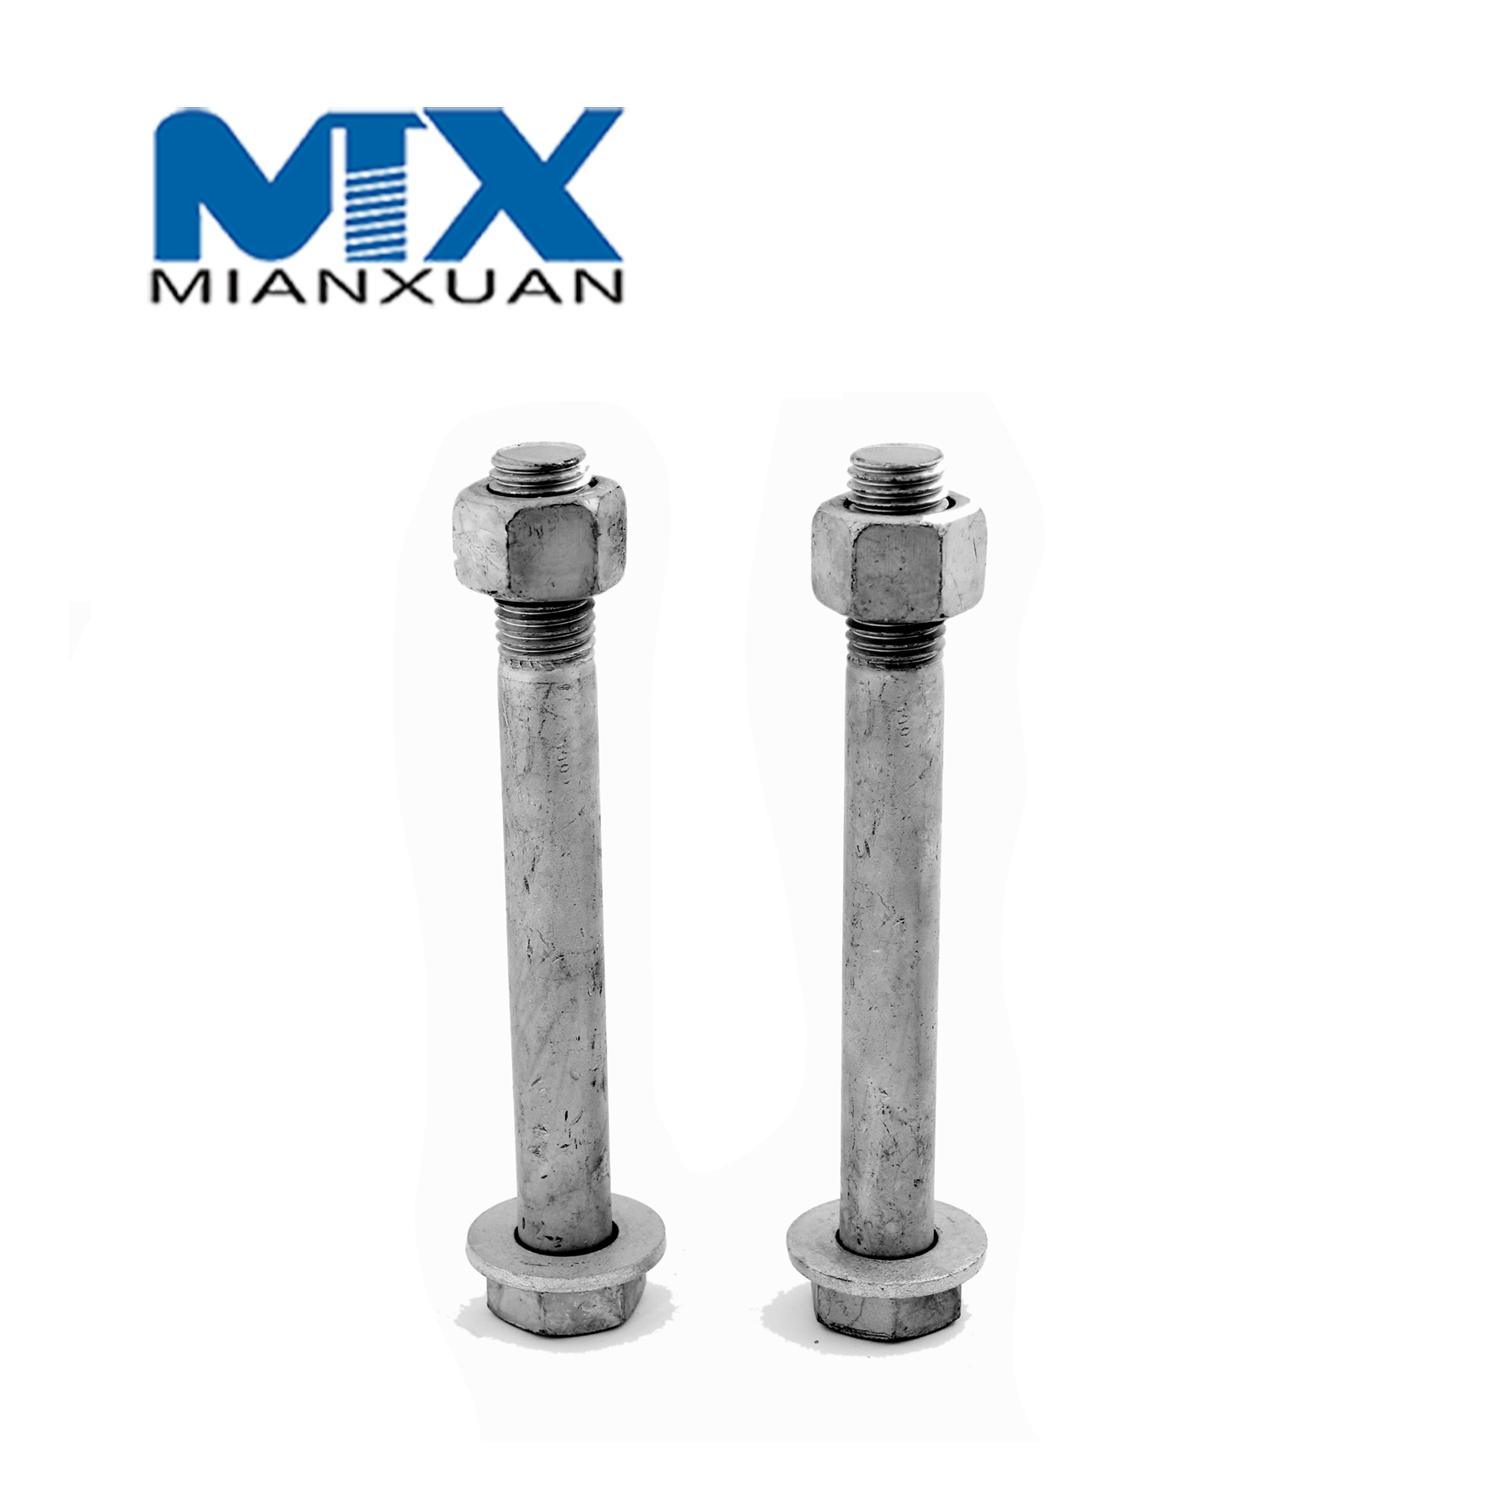 Hot DIP Galvanized Guardrails Bolts for Engineering